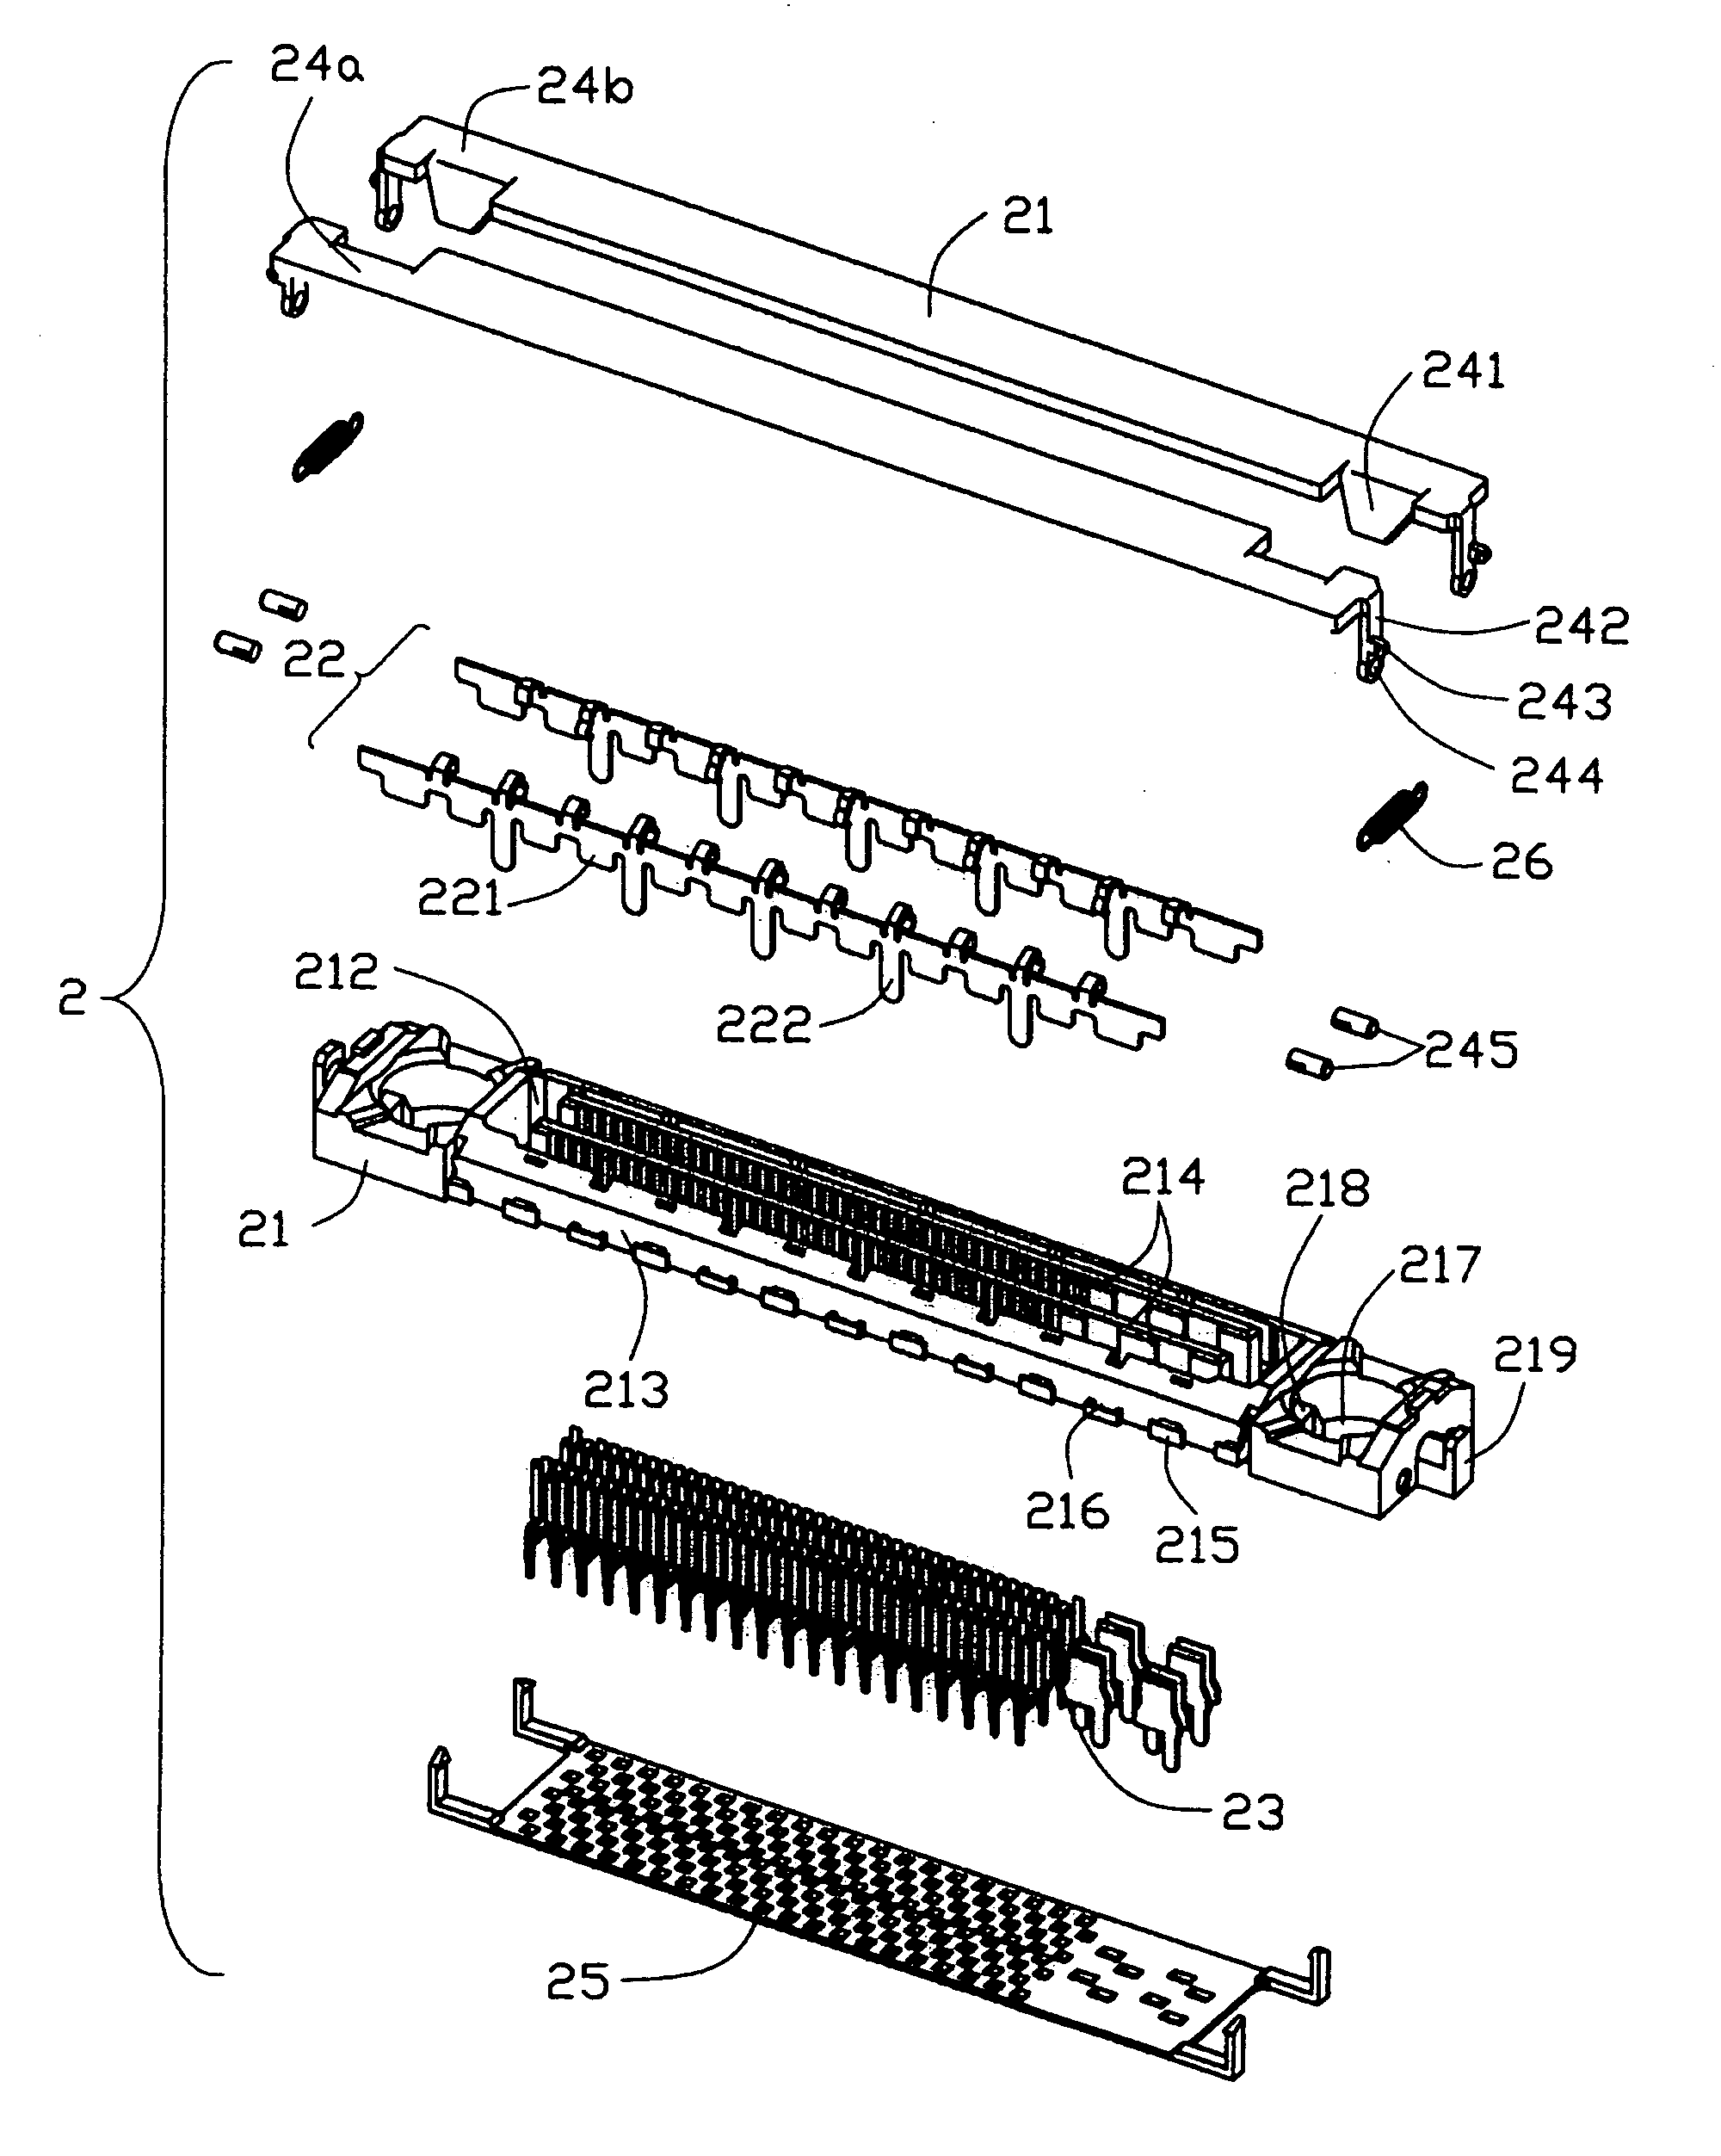 Electrical system with device for preventing electrostatic discharge